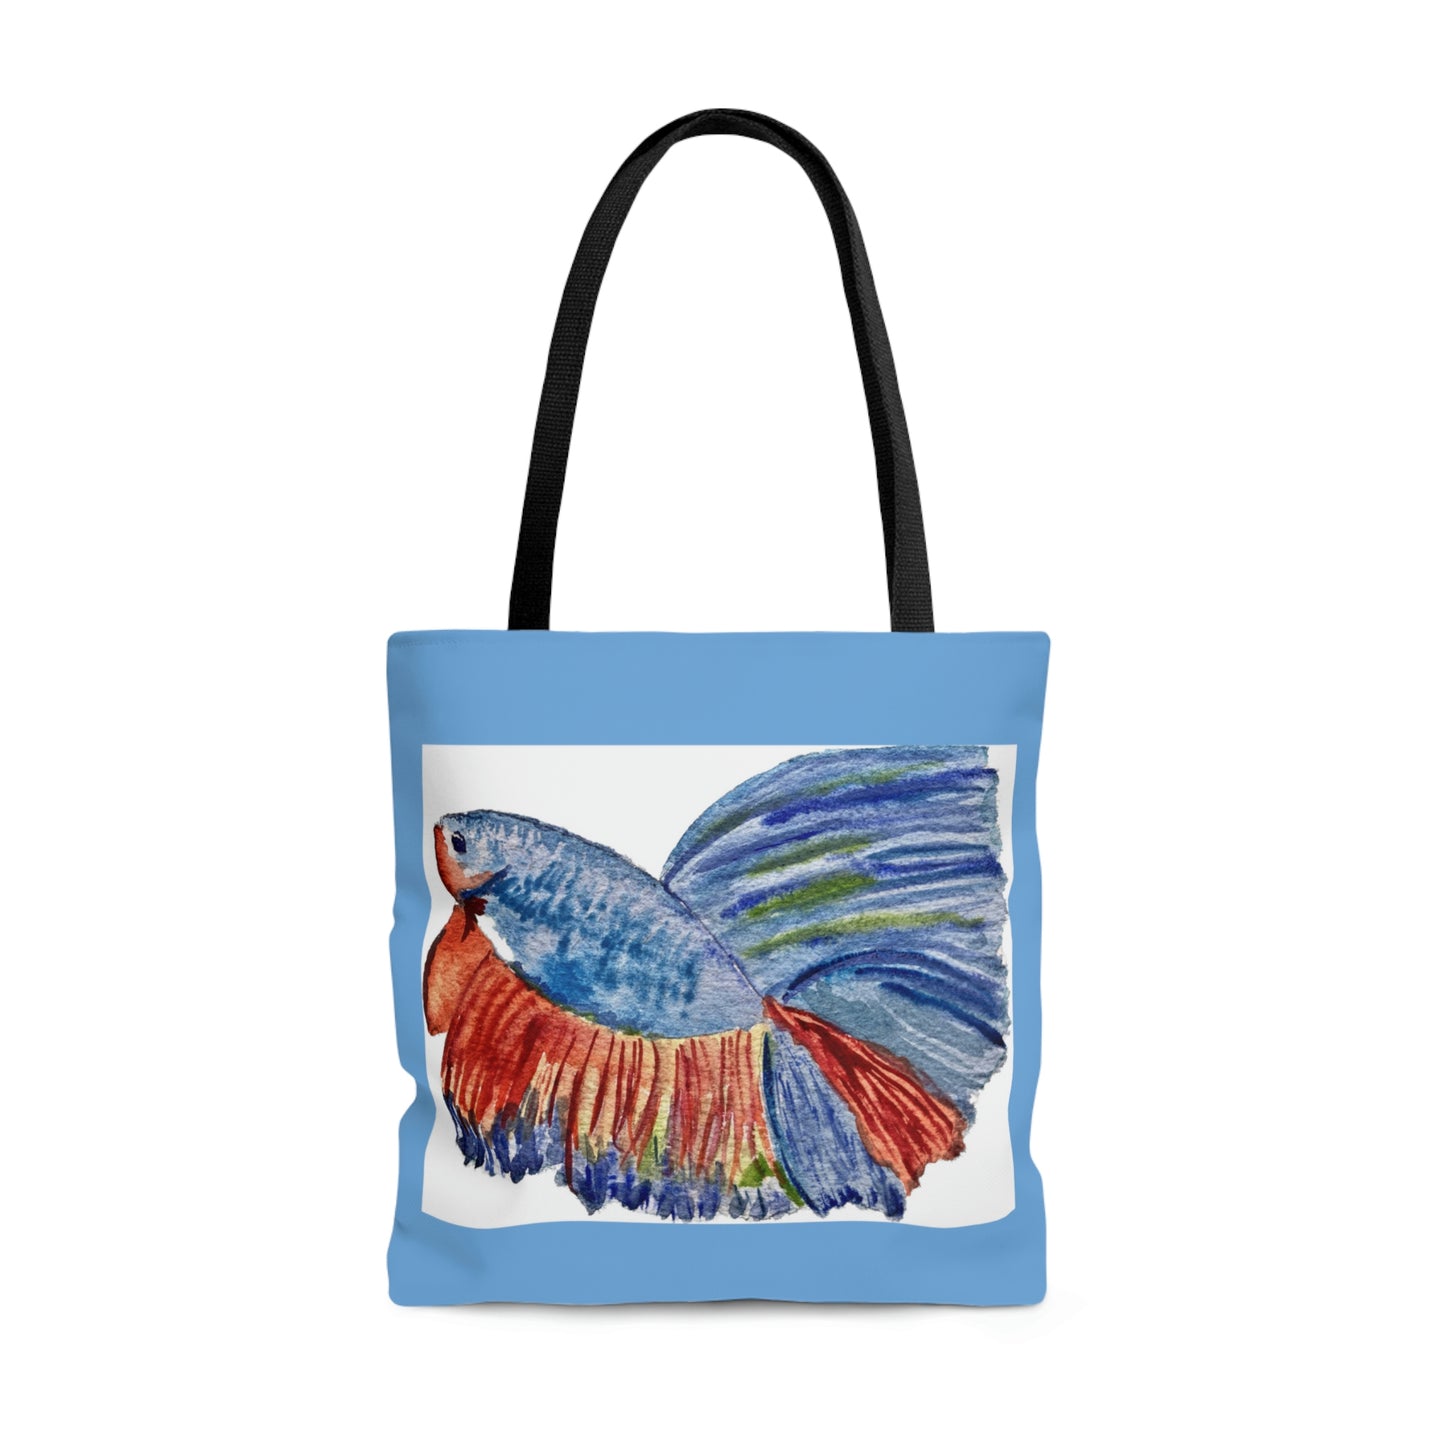 Blue Tropical Fish Tote Bag for the Beach,  Beach Theme Gifts, Vacation Accessories, Fish Tote Bag, Fish Lover